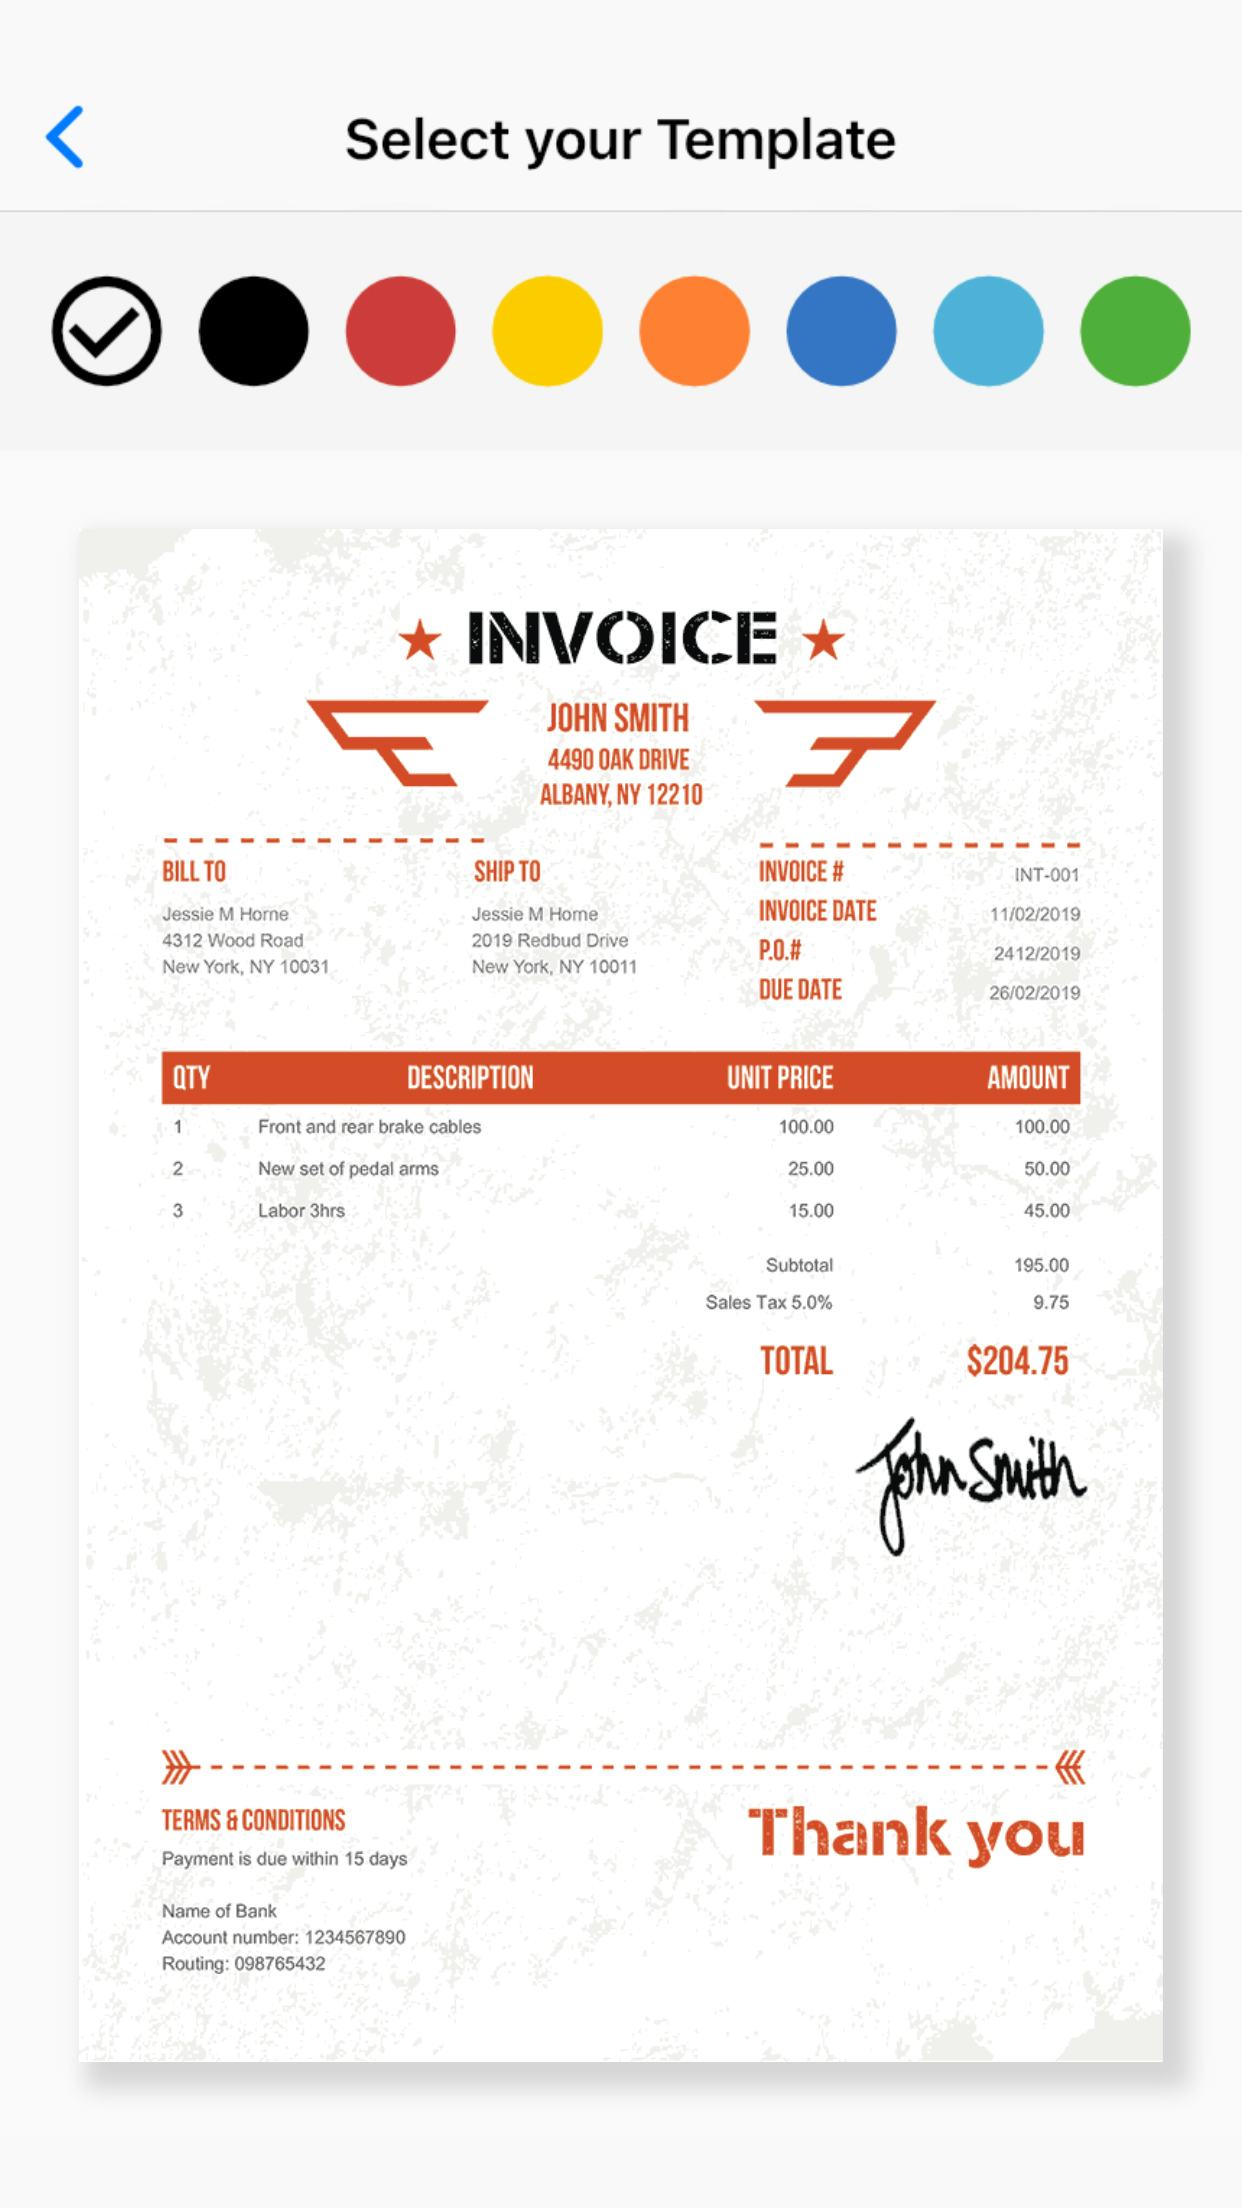 Invoice Home Software - 1